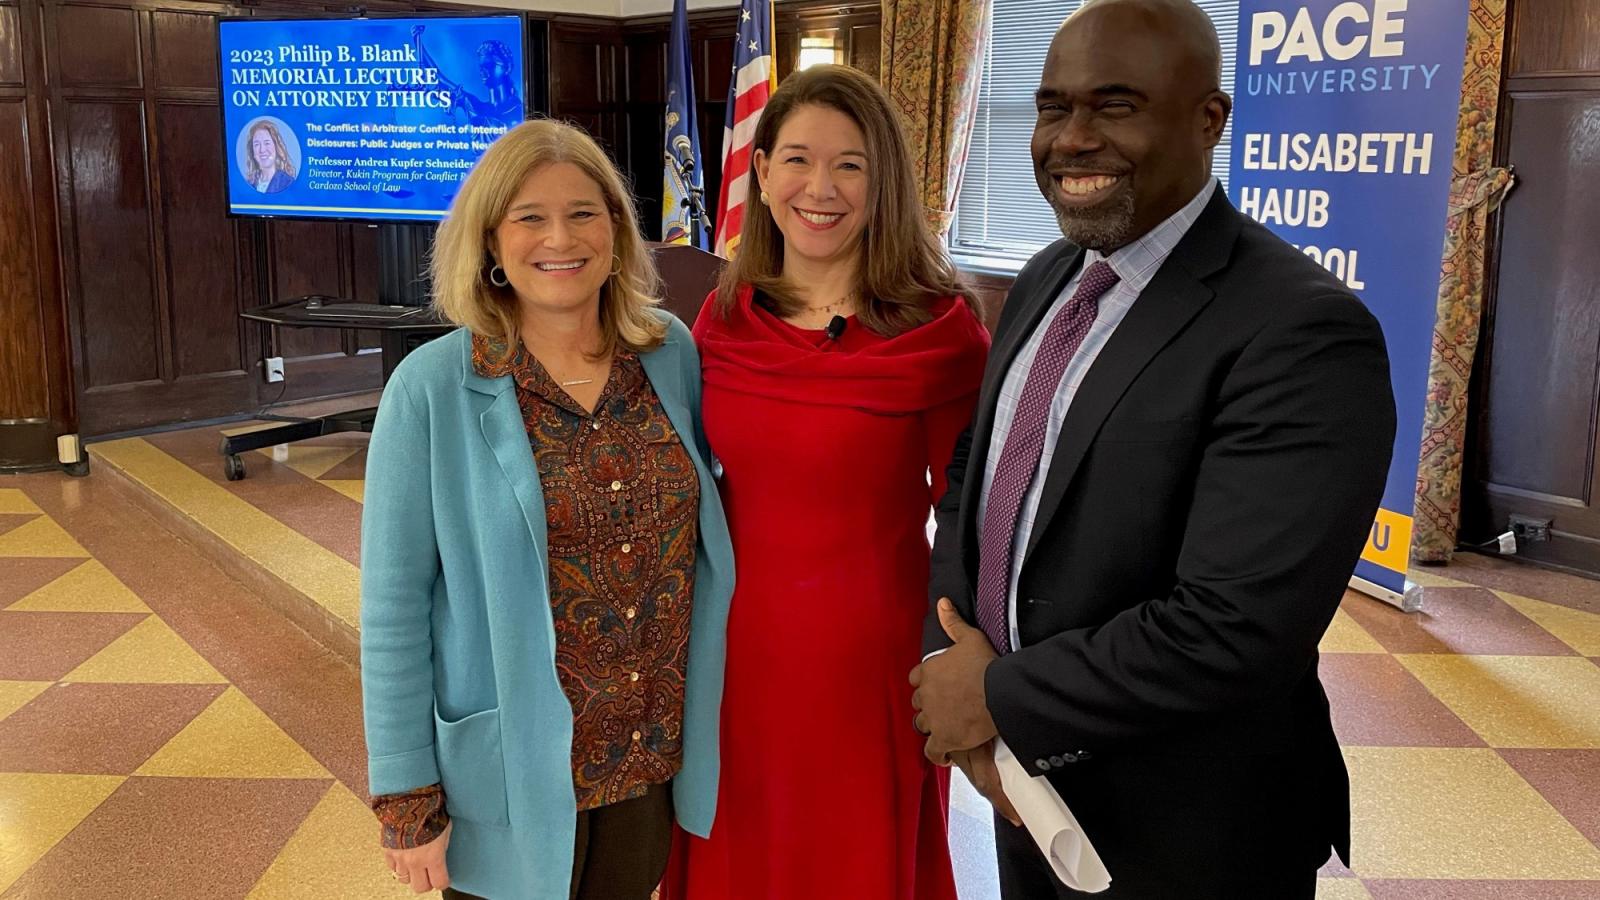 Three individuals pictured at the 2023 Blank Lecture: Professor Jill Gross, speaker Andrea Kupfer Schneider, Dean Horace Anderson